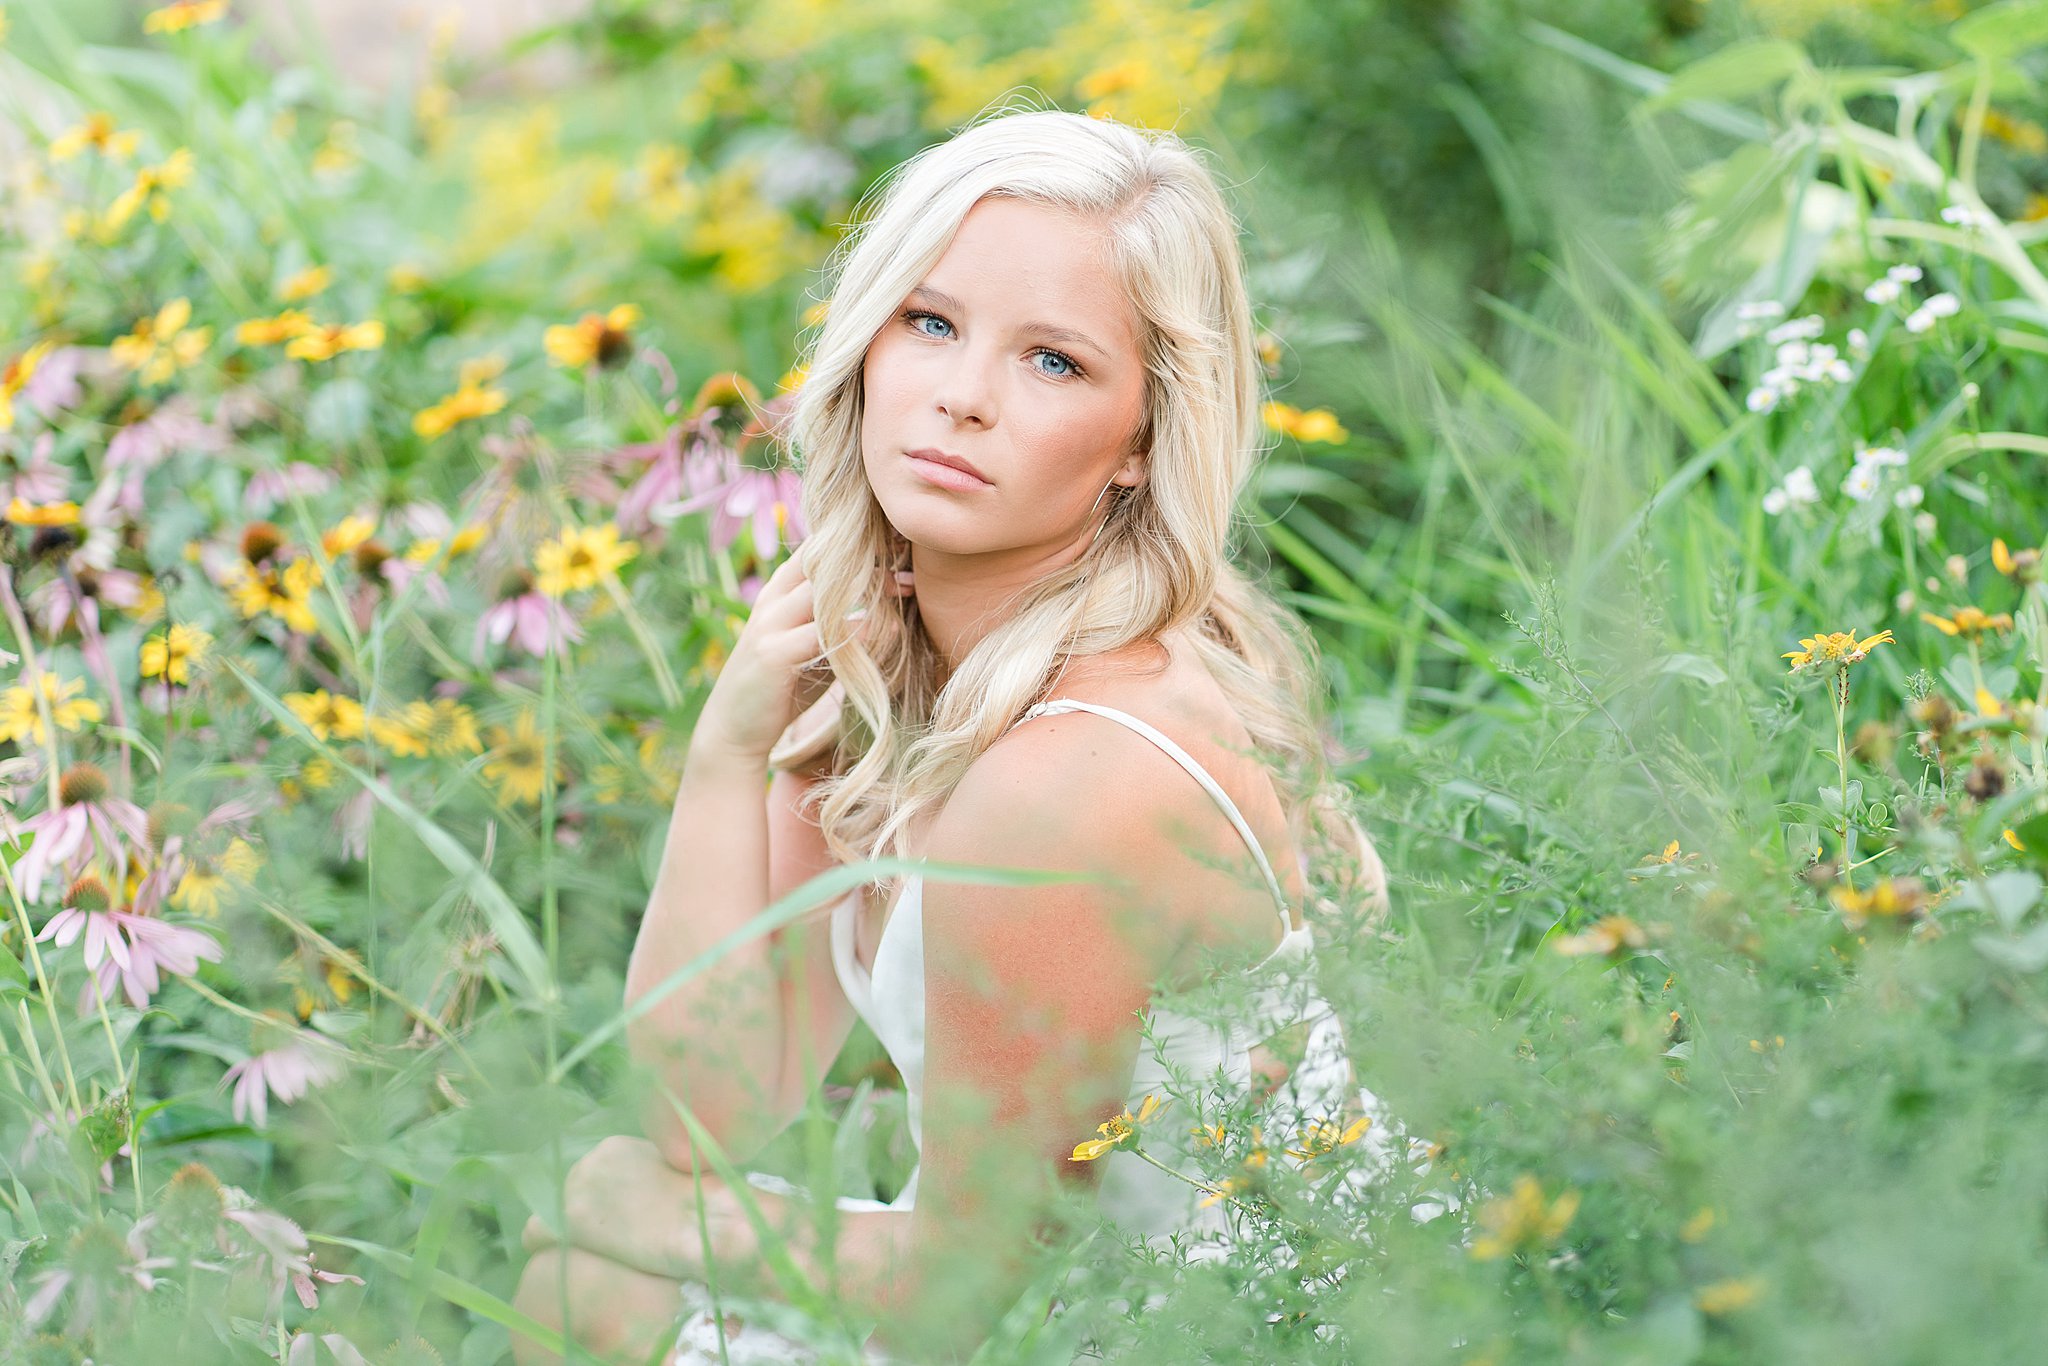 High school senior sits in a field of colorful wildflowers